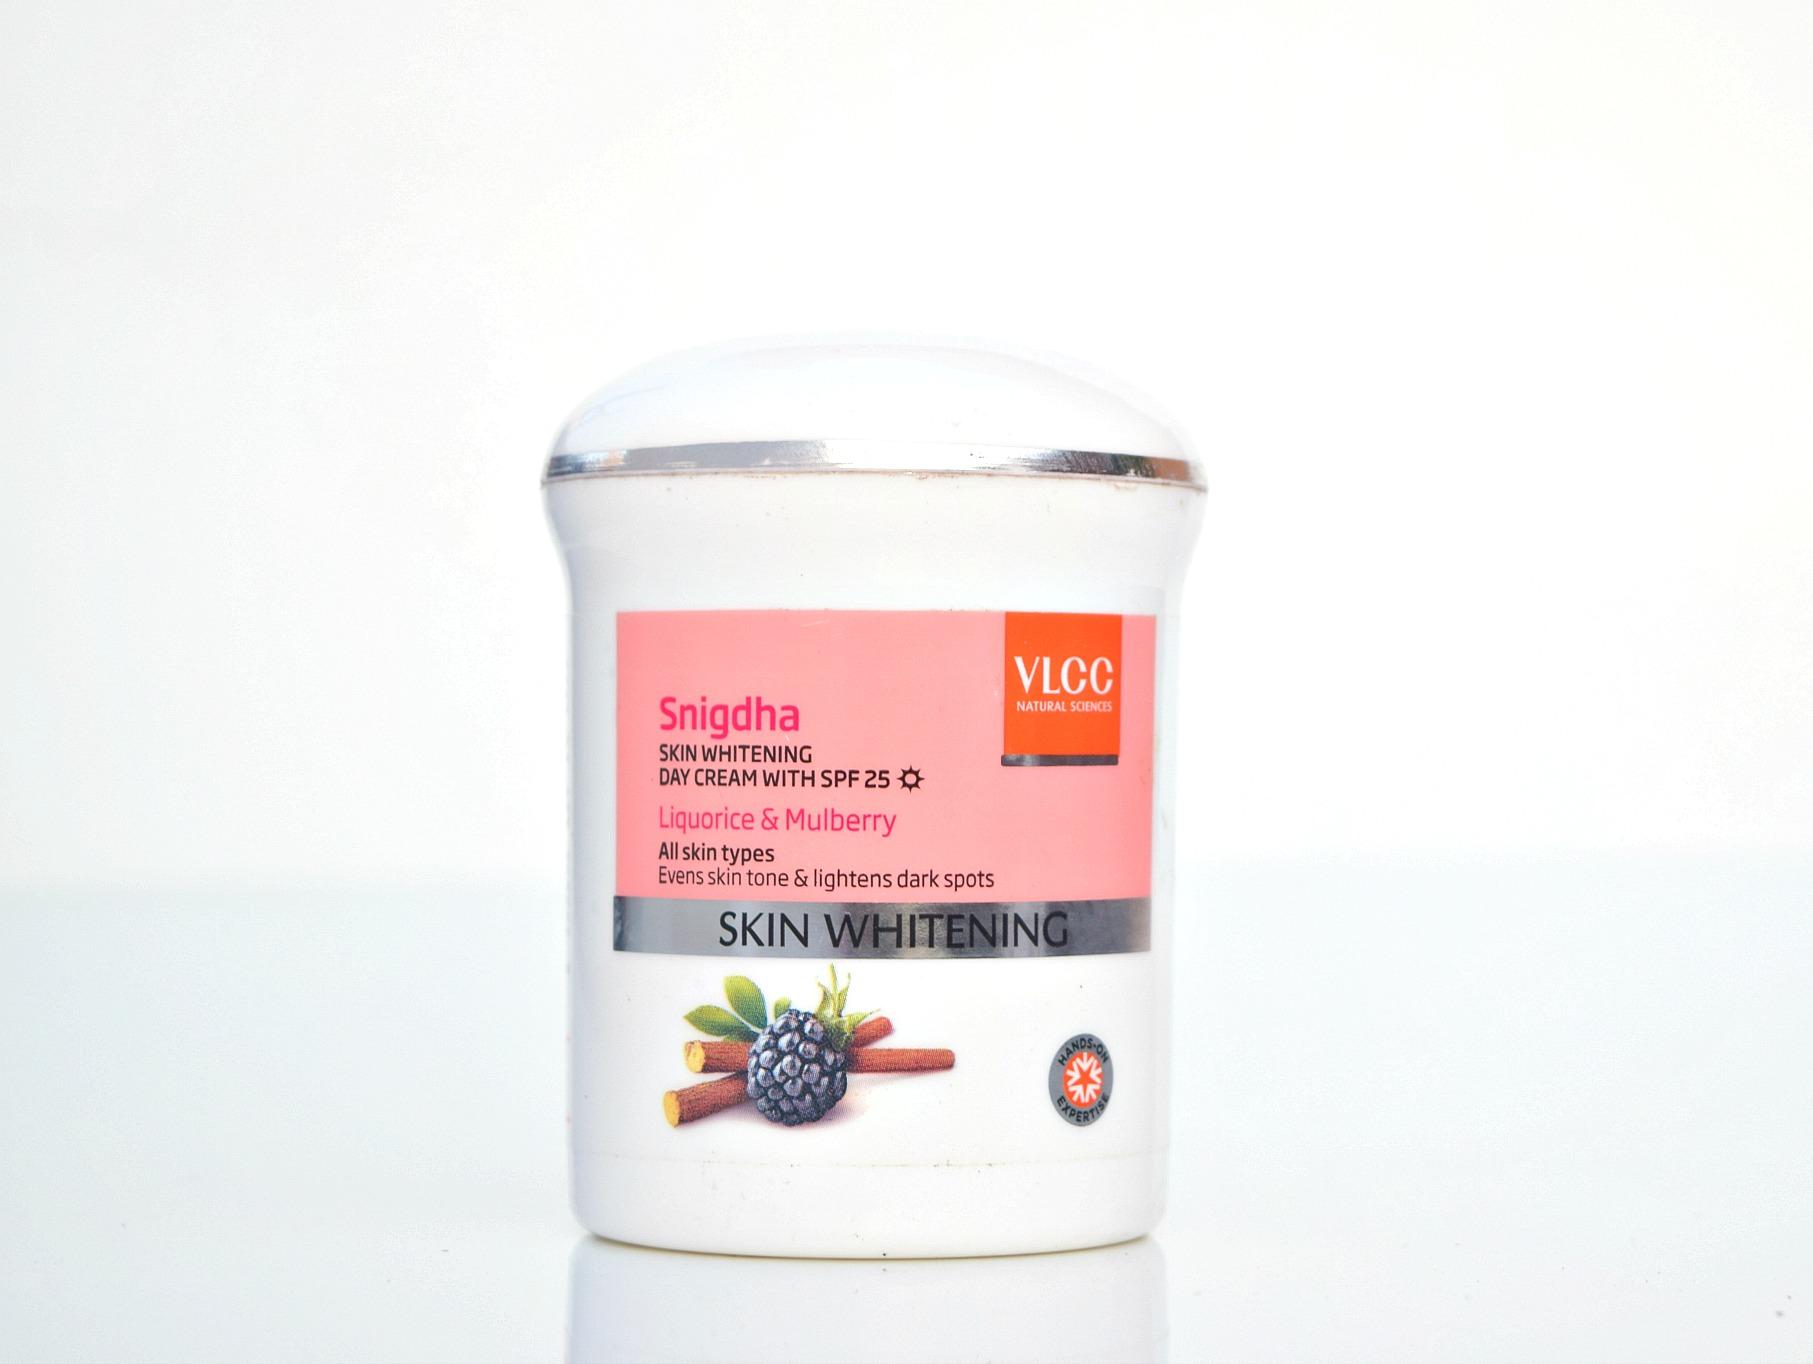 VLCC Snigdha Skin Whitening Day Cream with SPF 25 Review